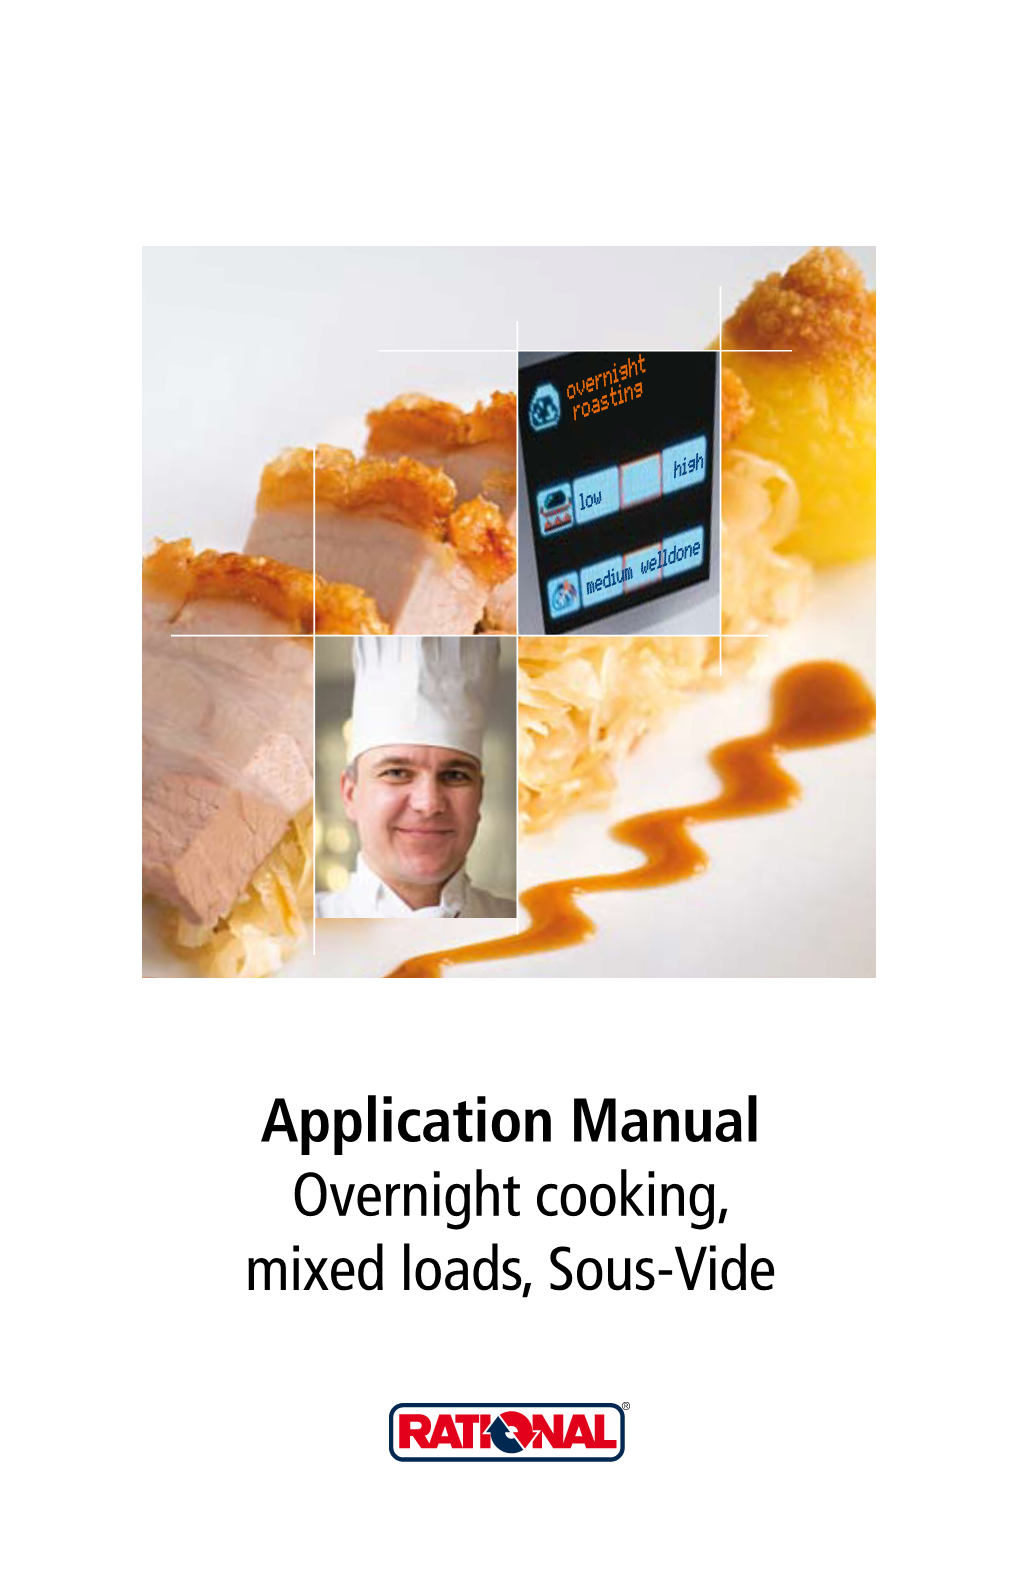 Application Manual Overnight Cooking, Mixed Loads, Sous-Vide